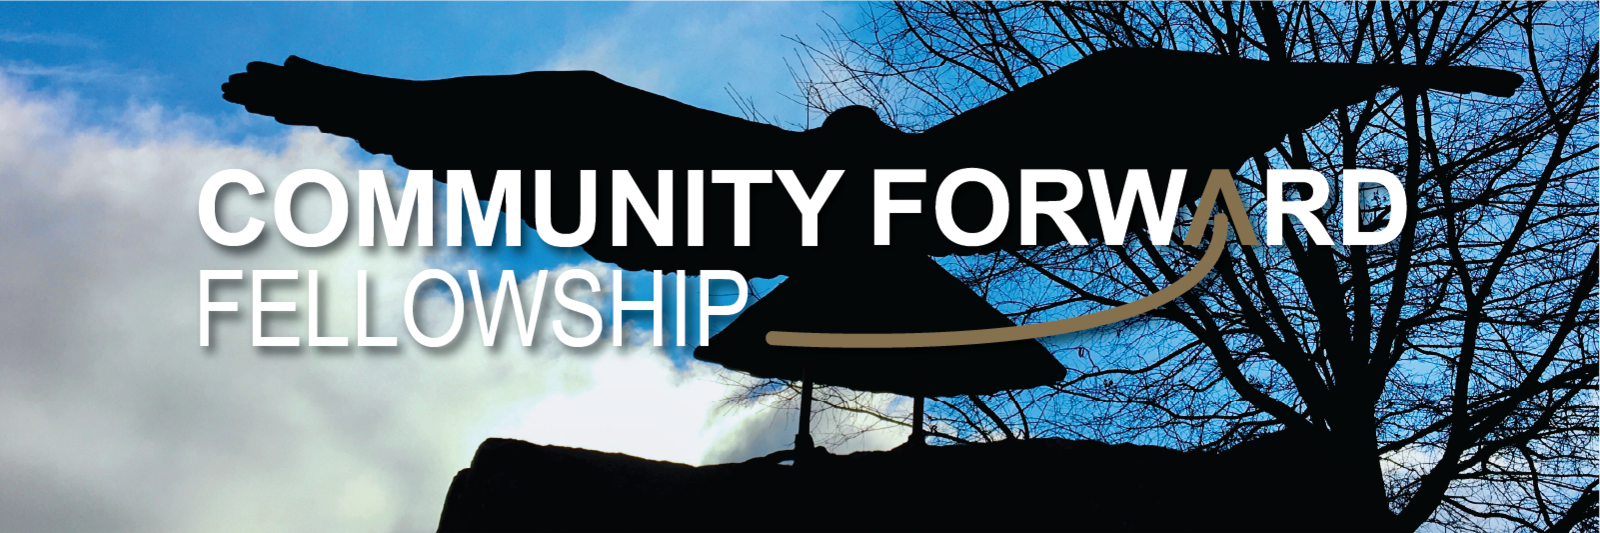 Community Forward Fellowship logo over top a picture